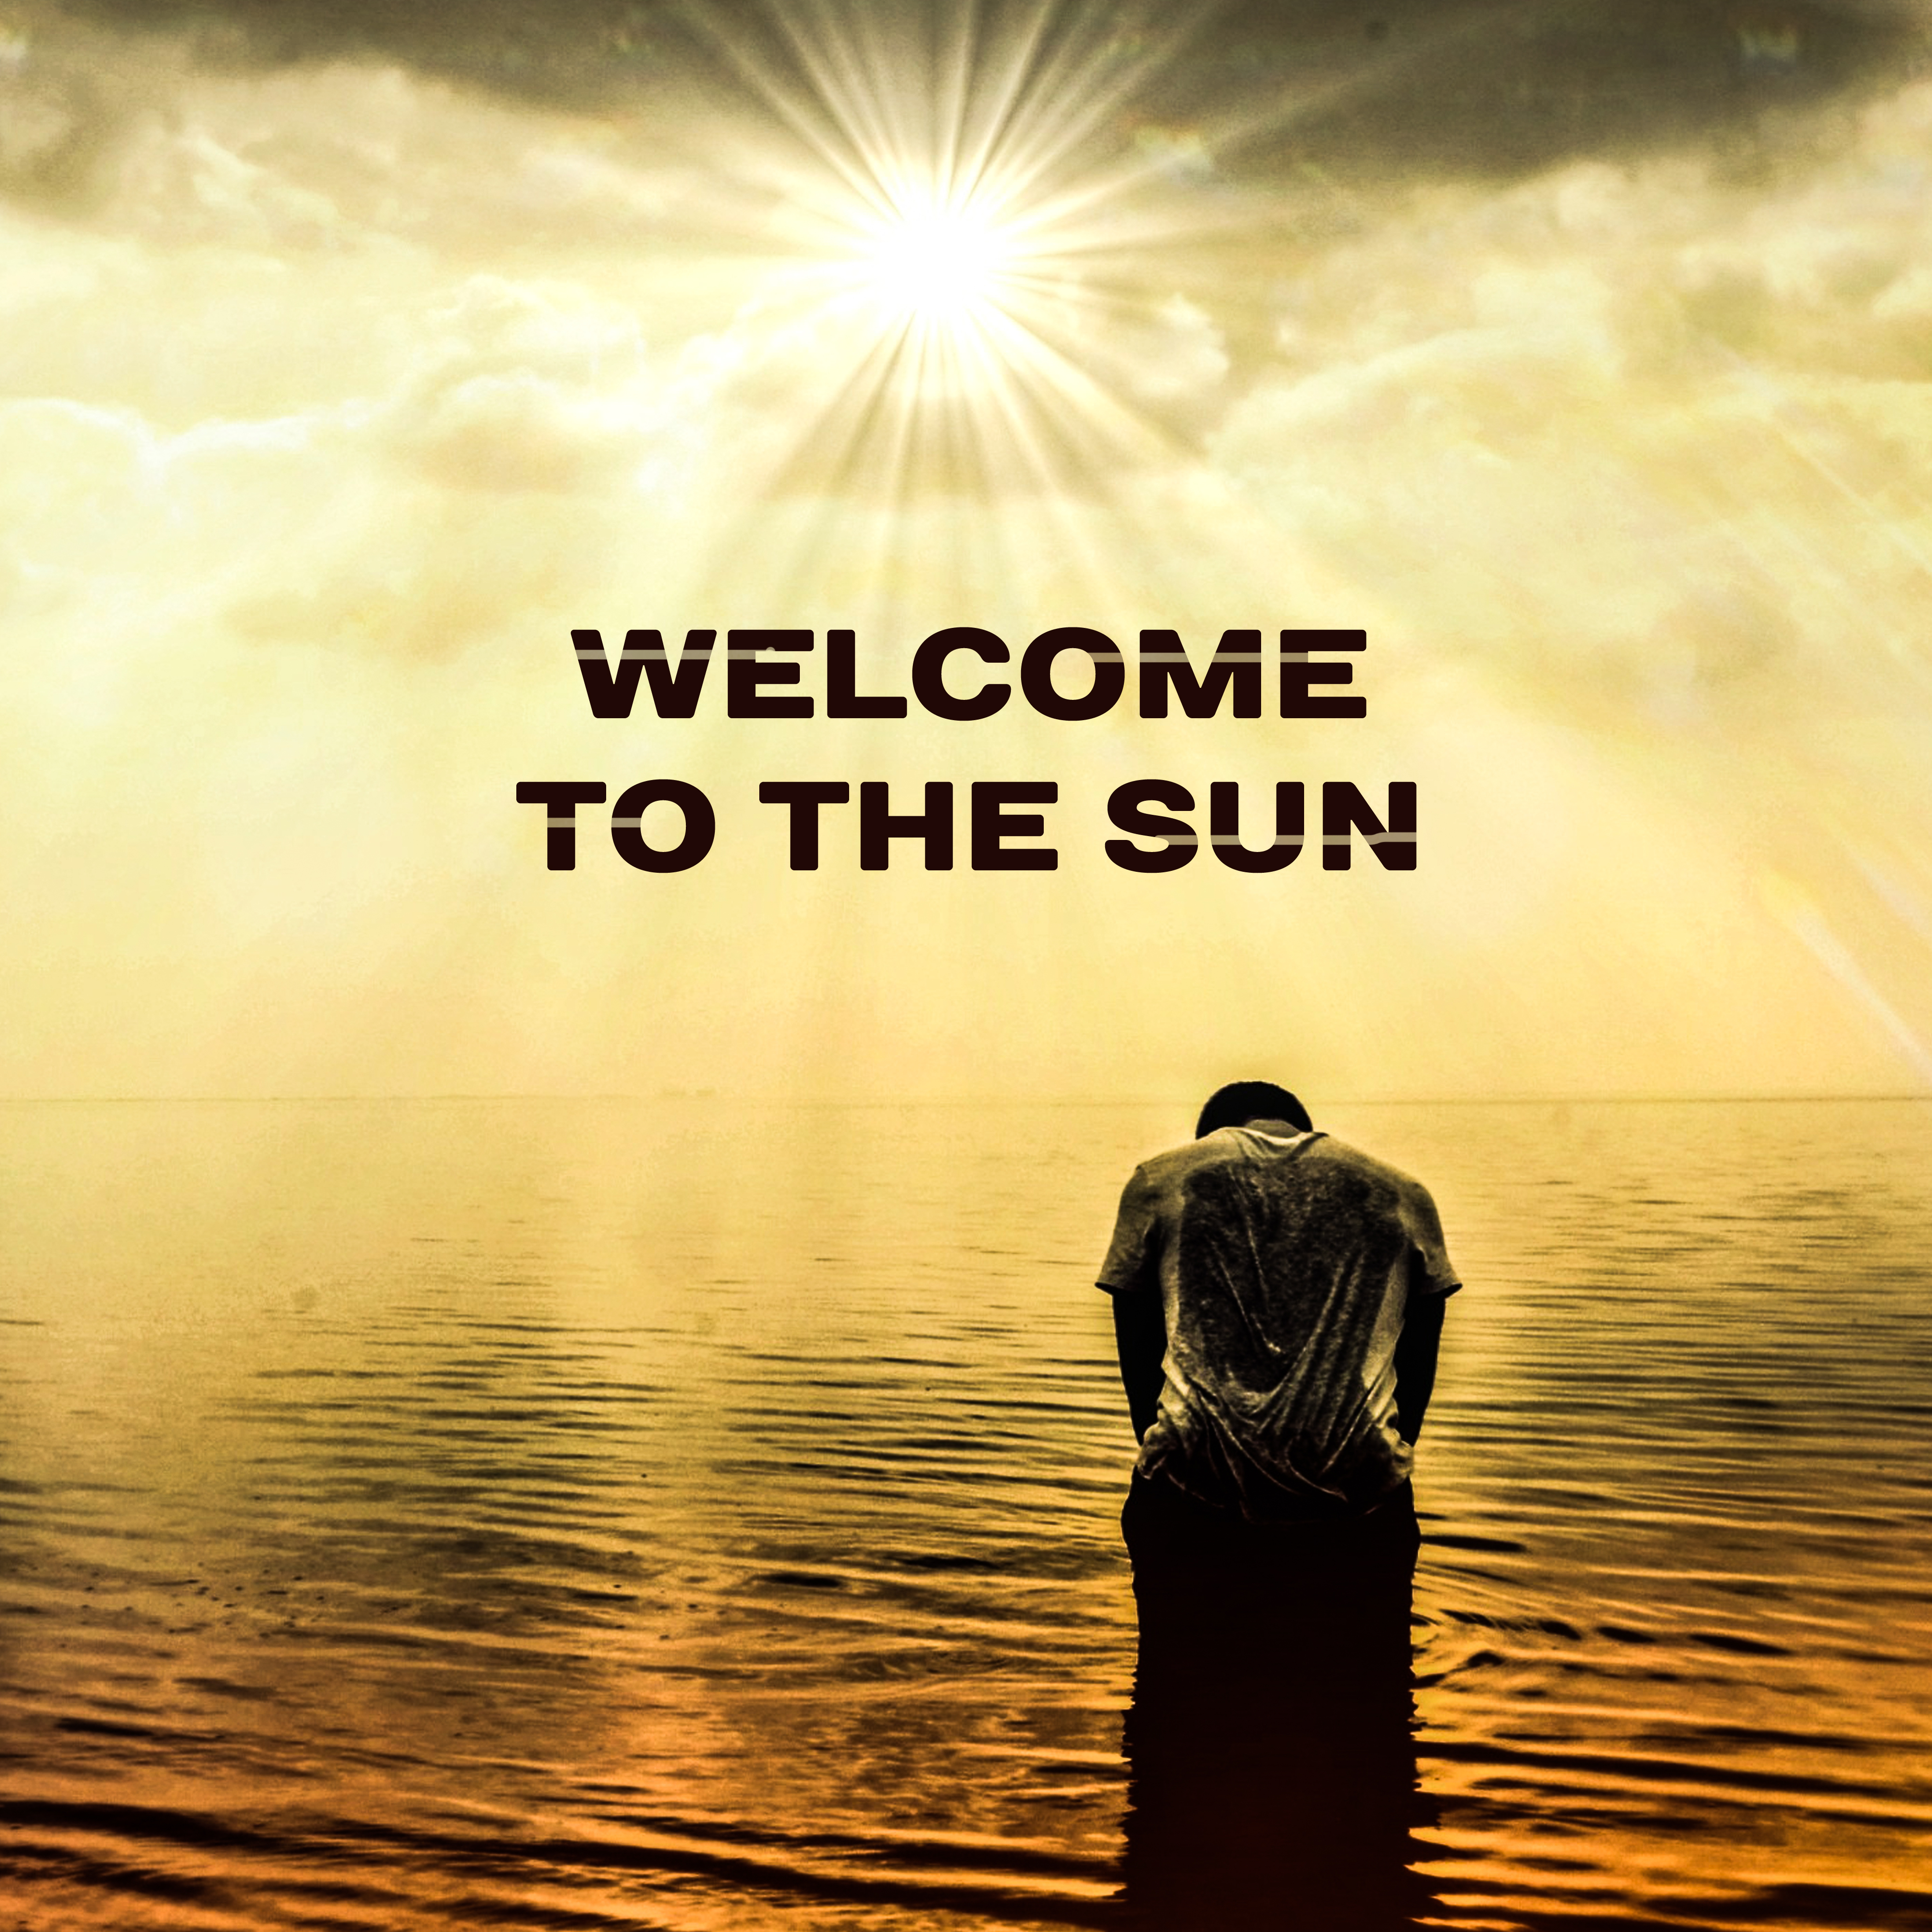 Welcome to The Sun – New Age, Music for Meditation, Relaxation, Spa, Massage, Zen, Bliss, Healing Relaxation